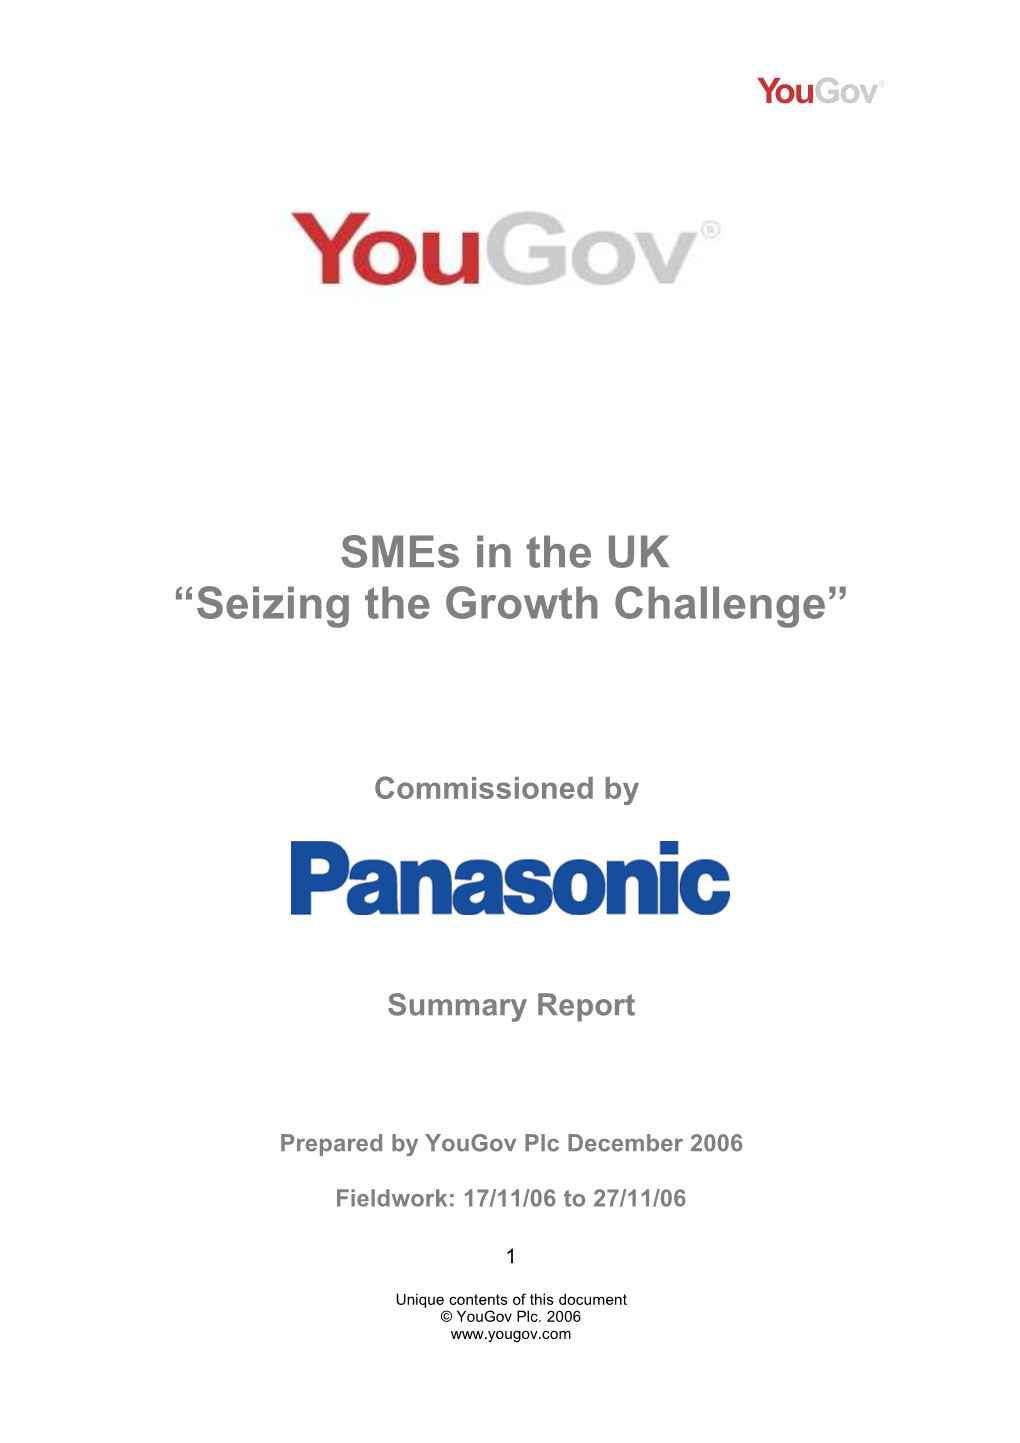 Smes in the UK “Seizing the Growth Challenge”